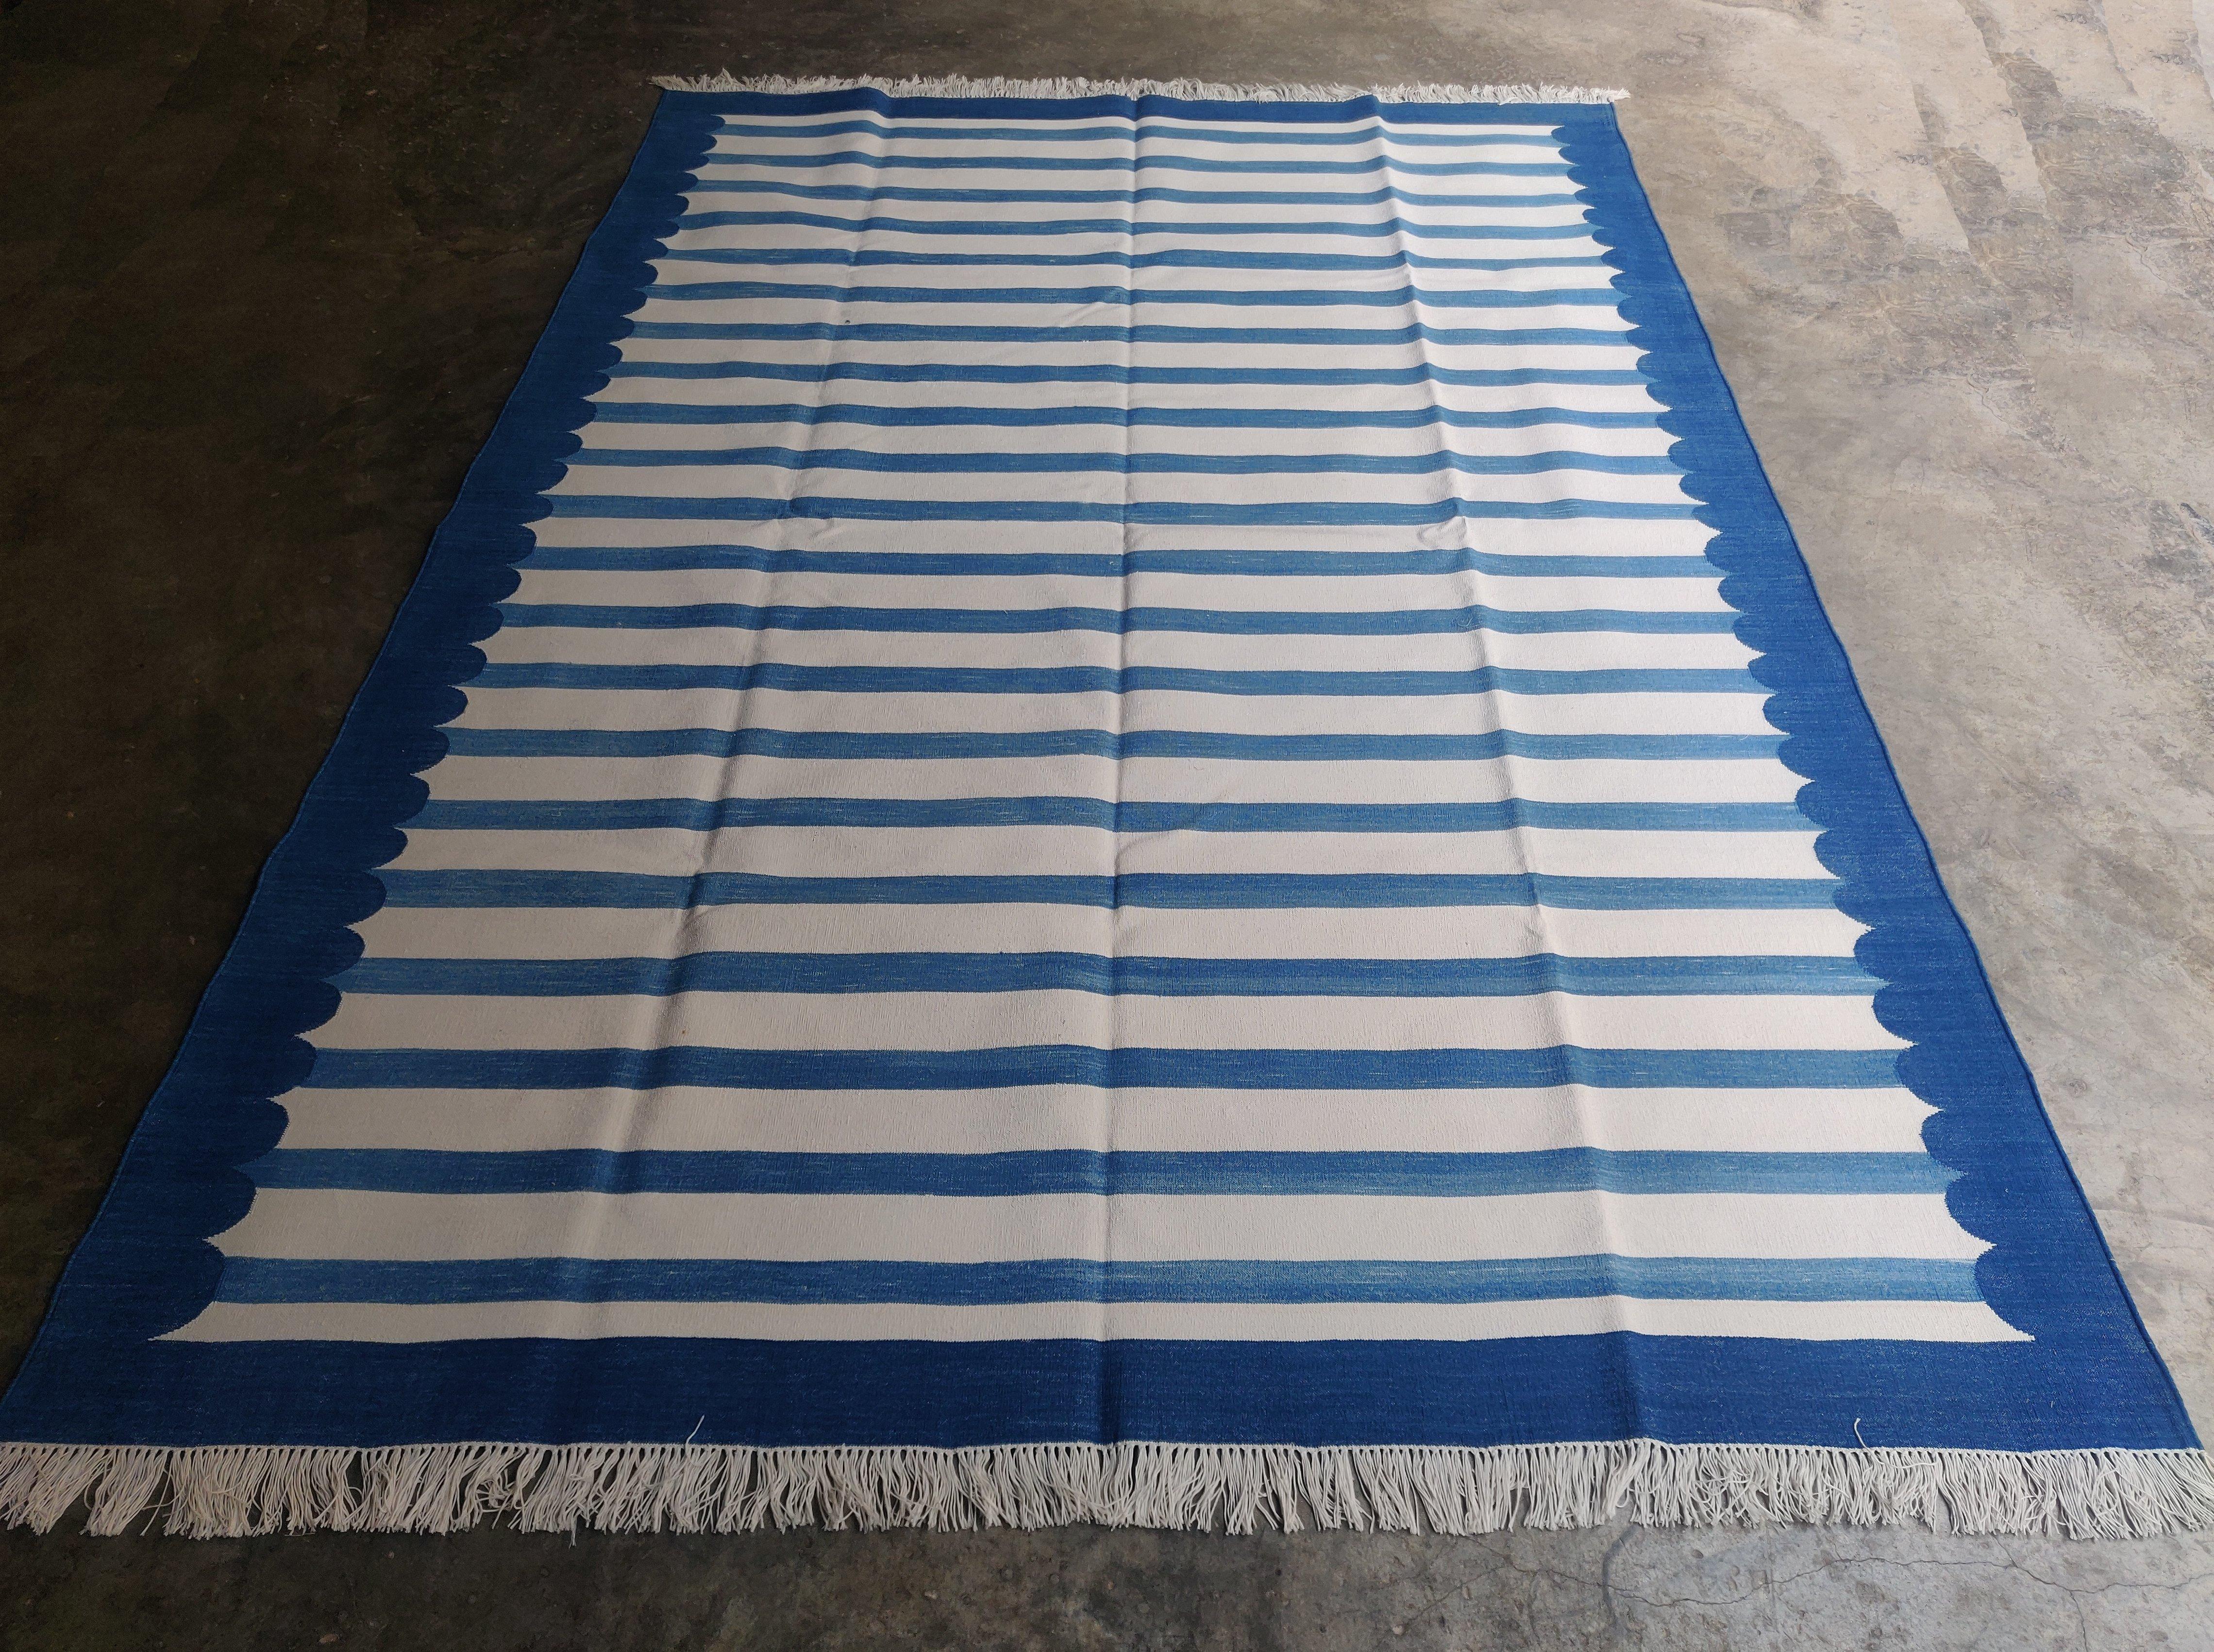 Hand-Woven Handmade Cotton Area Flat Weave Rug, 6x9 Blue And White Striped Indian Dhurrie For Sale